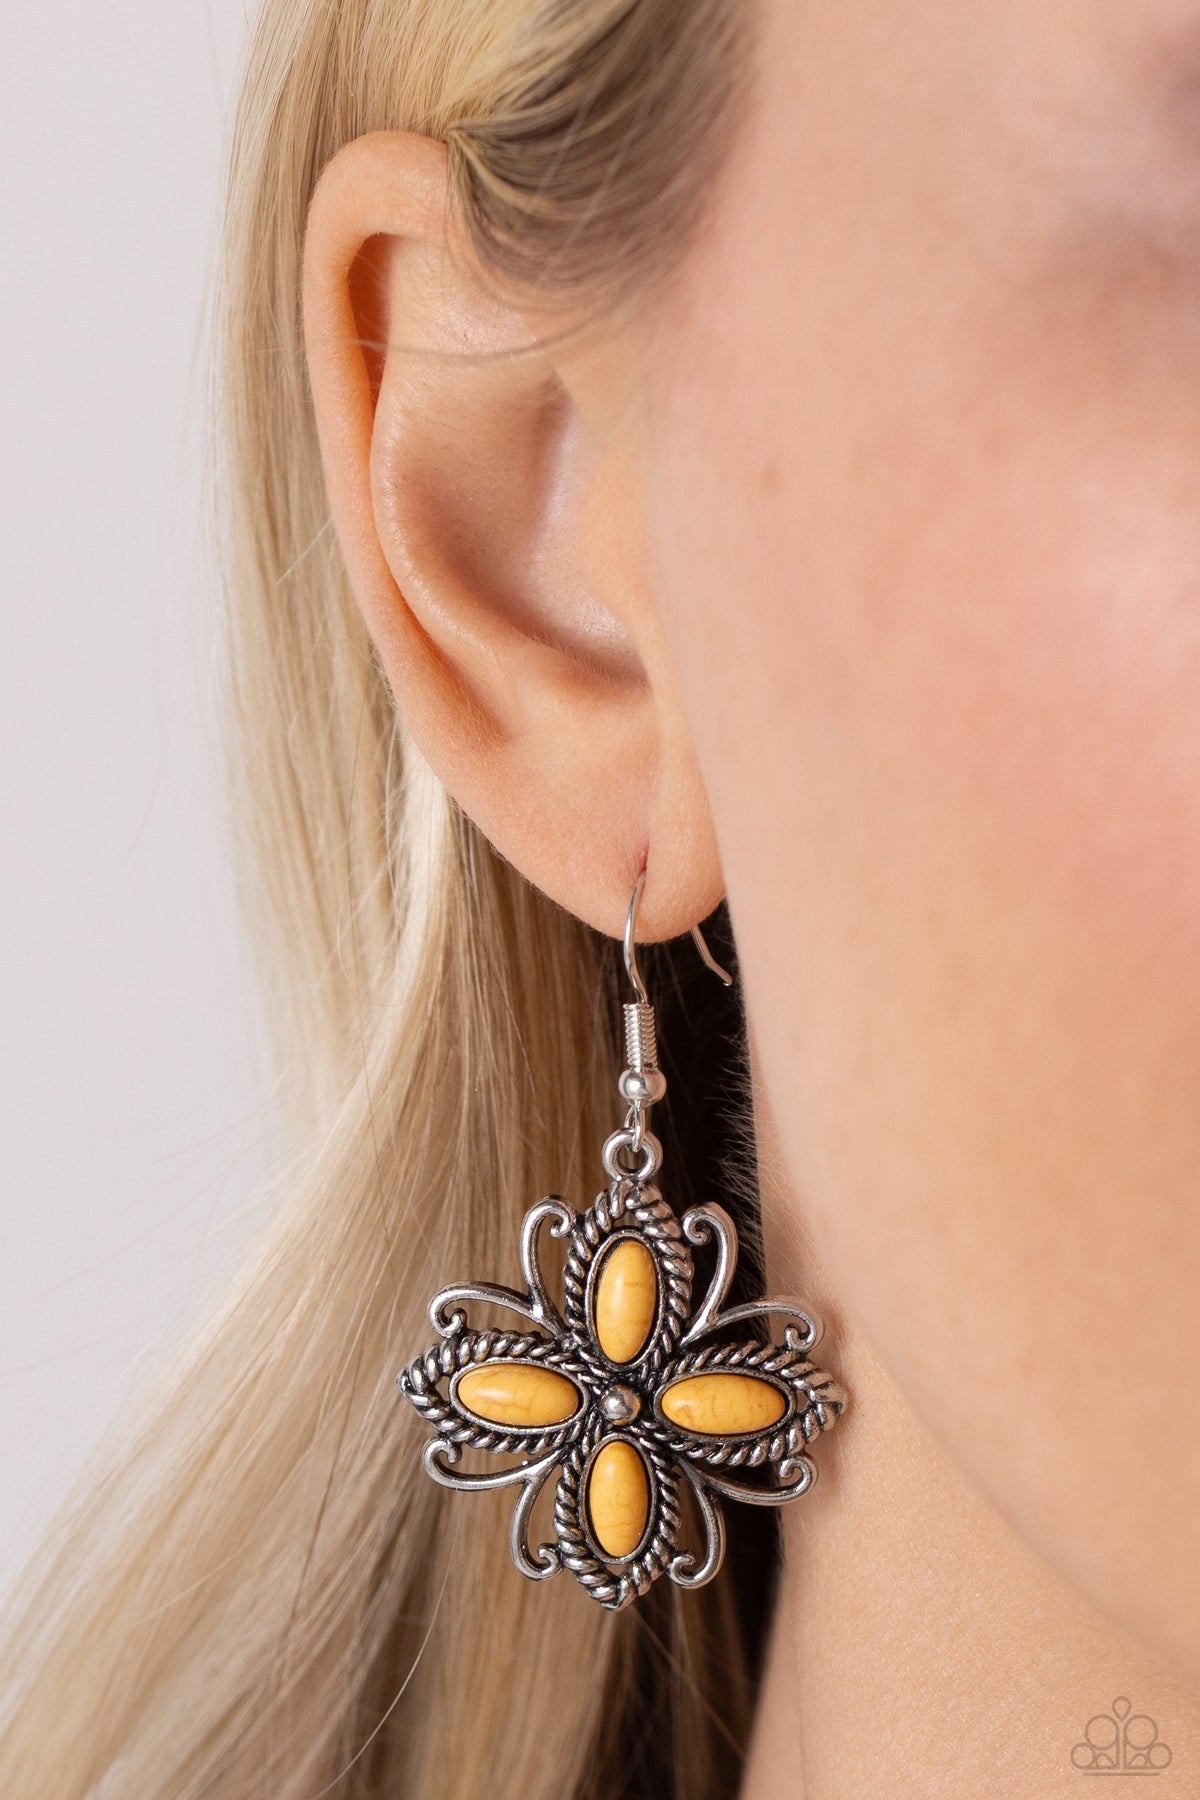 Badlands Ballad Yellow Stone Earrings - Paparazzi Accessories-on model - CarasShop.com - $5 Jewelry by Cara Jewels